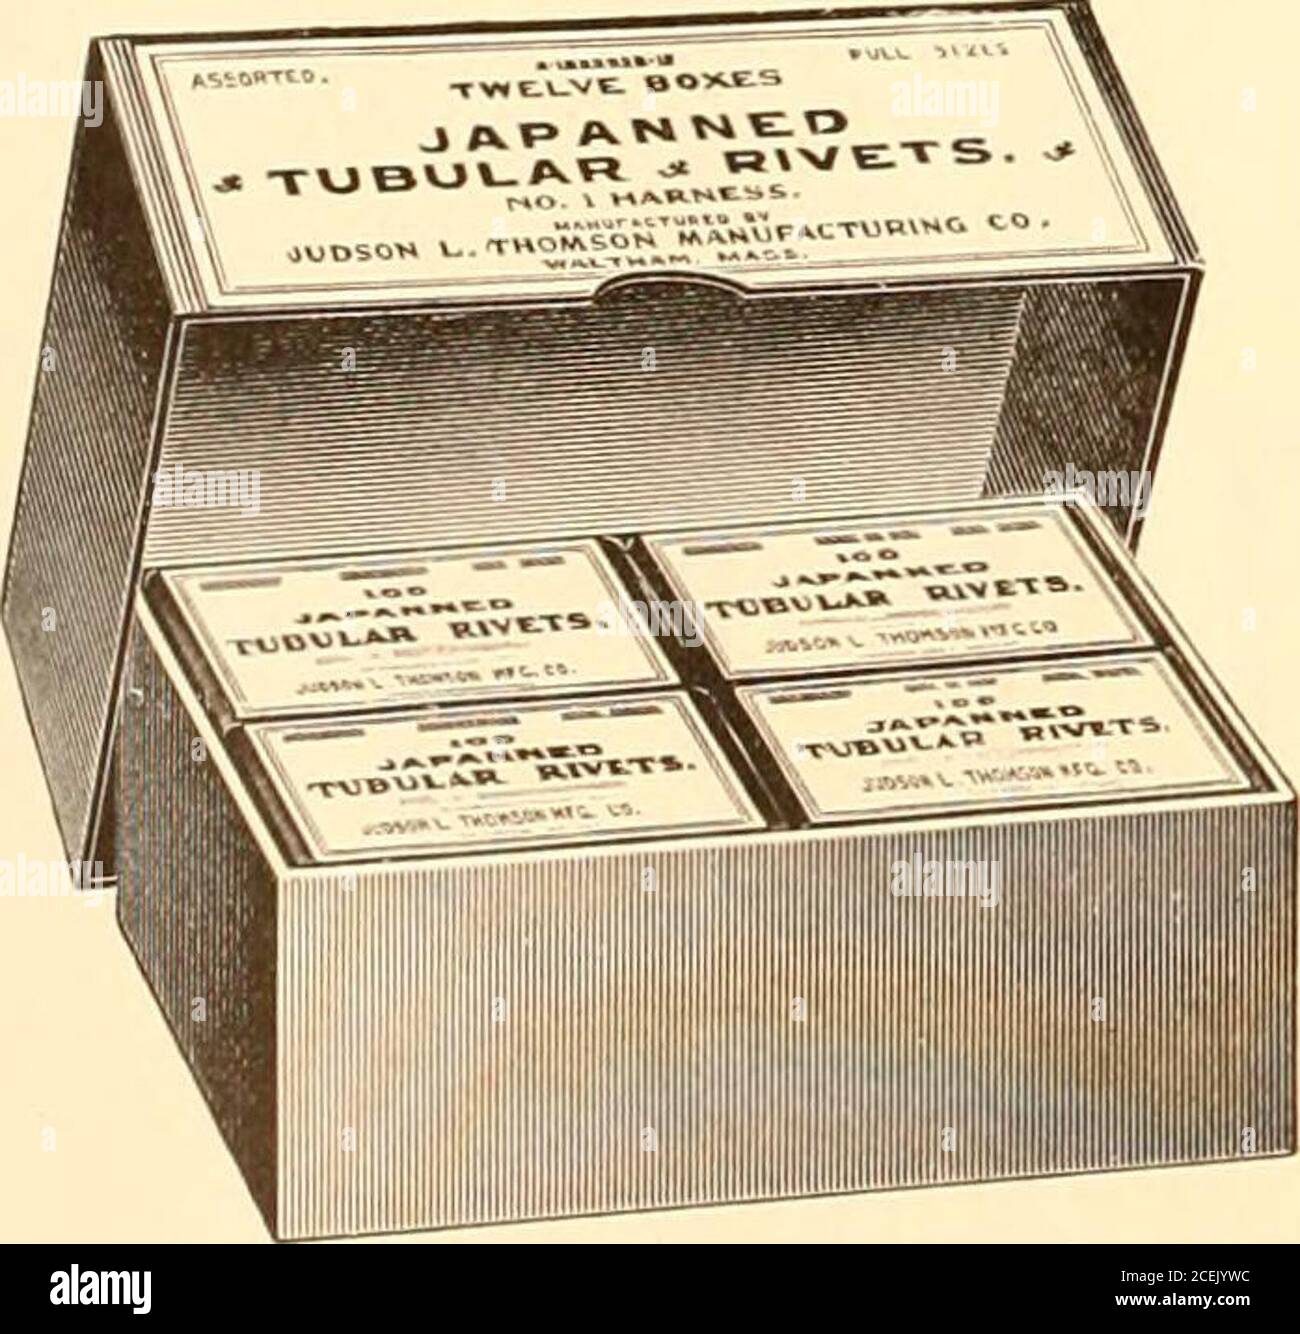 Illustrated And Descriptive Catalog Of Saddlery Carriage And Sleigh Trimmings General Store Supplies I Pound Boxes Assorted Lengths Yi To V Inch Price Per Pound G 50 55 60 50 60 Tubular Rivets Japanned Or Coppered